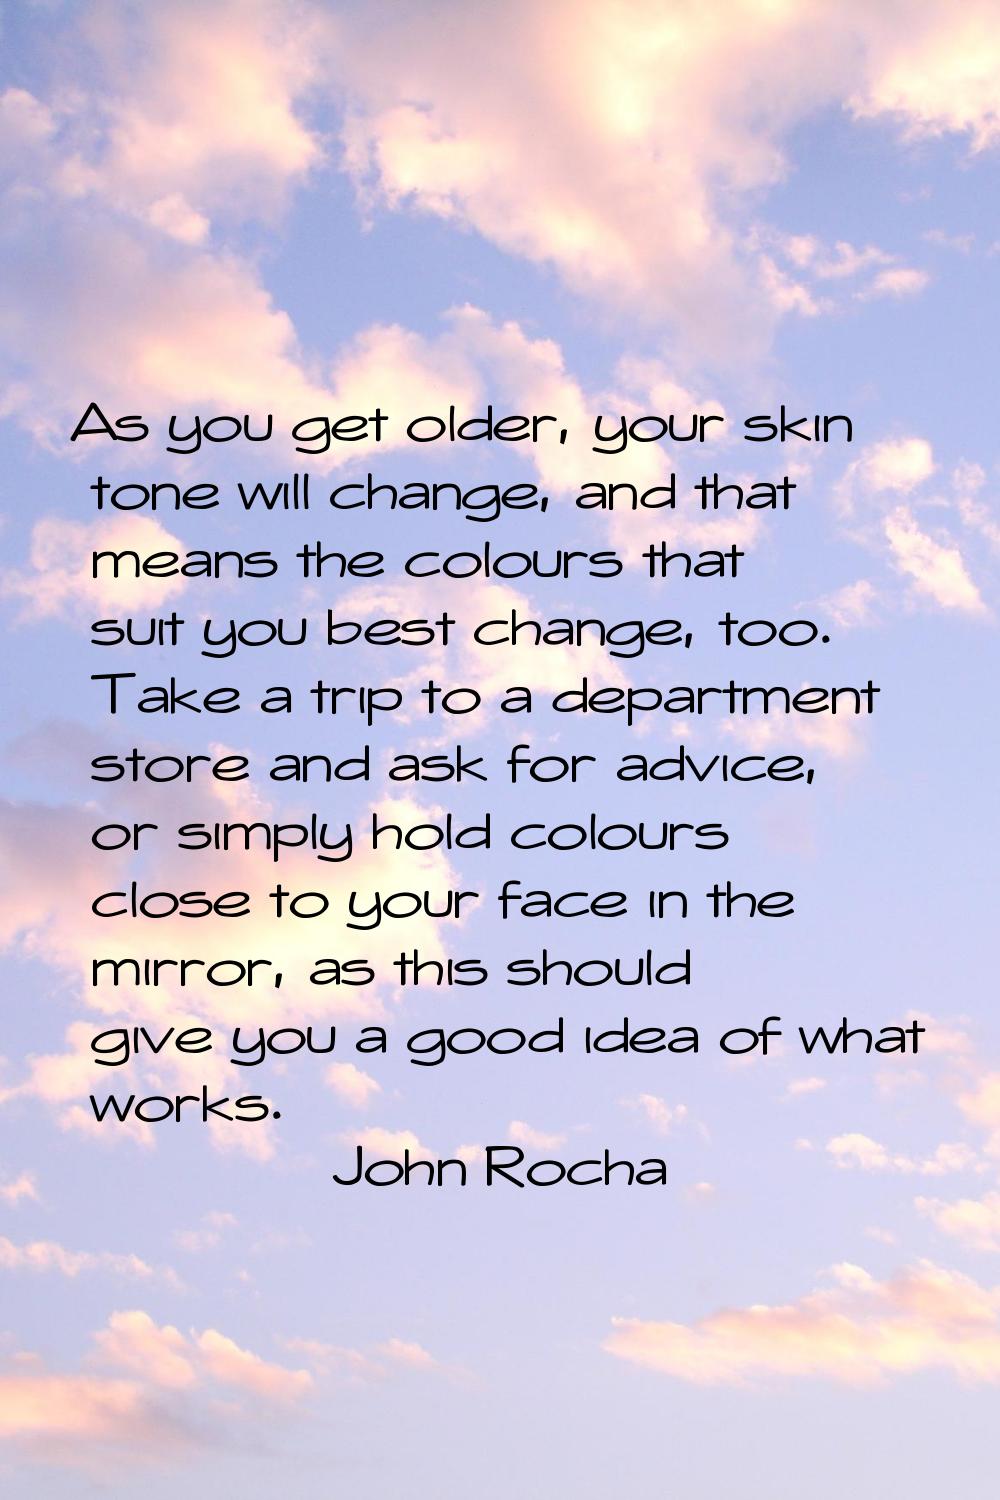 As you get older, your skin tone will change, and that means the colours that suit you best change,